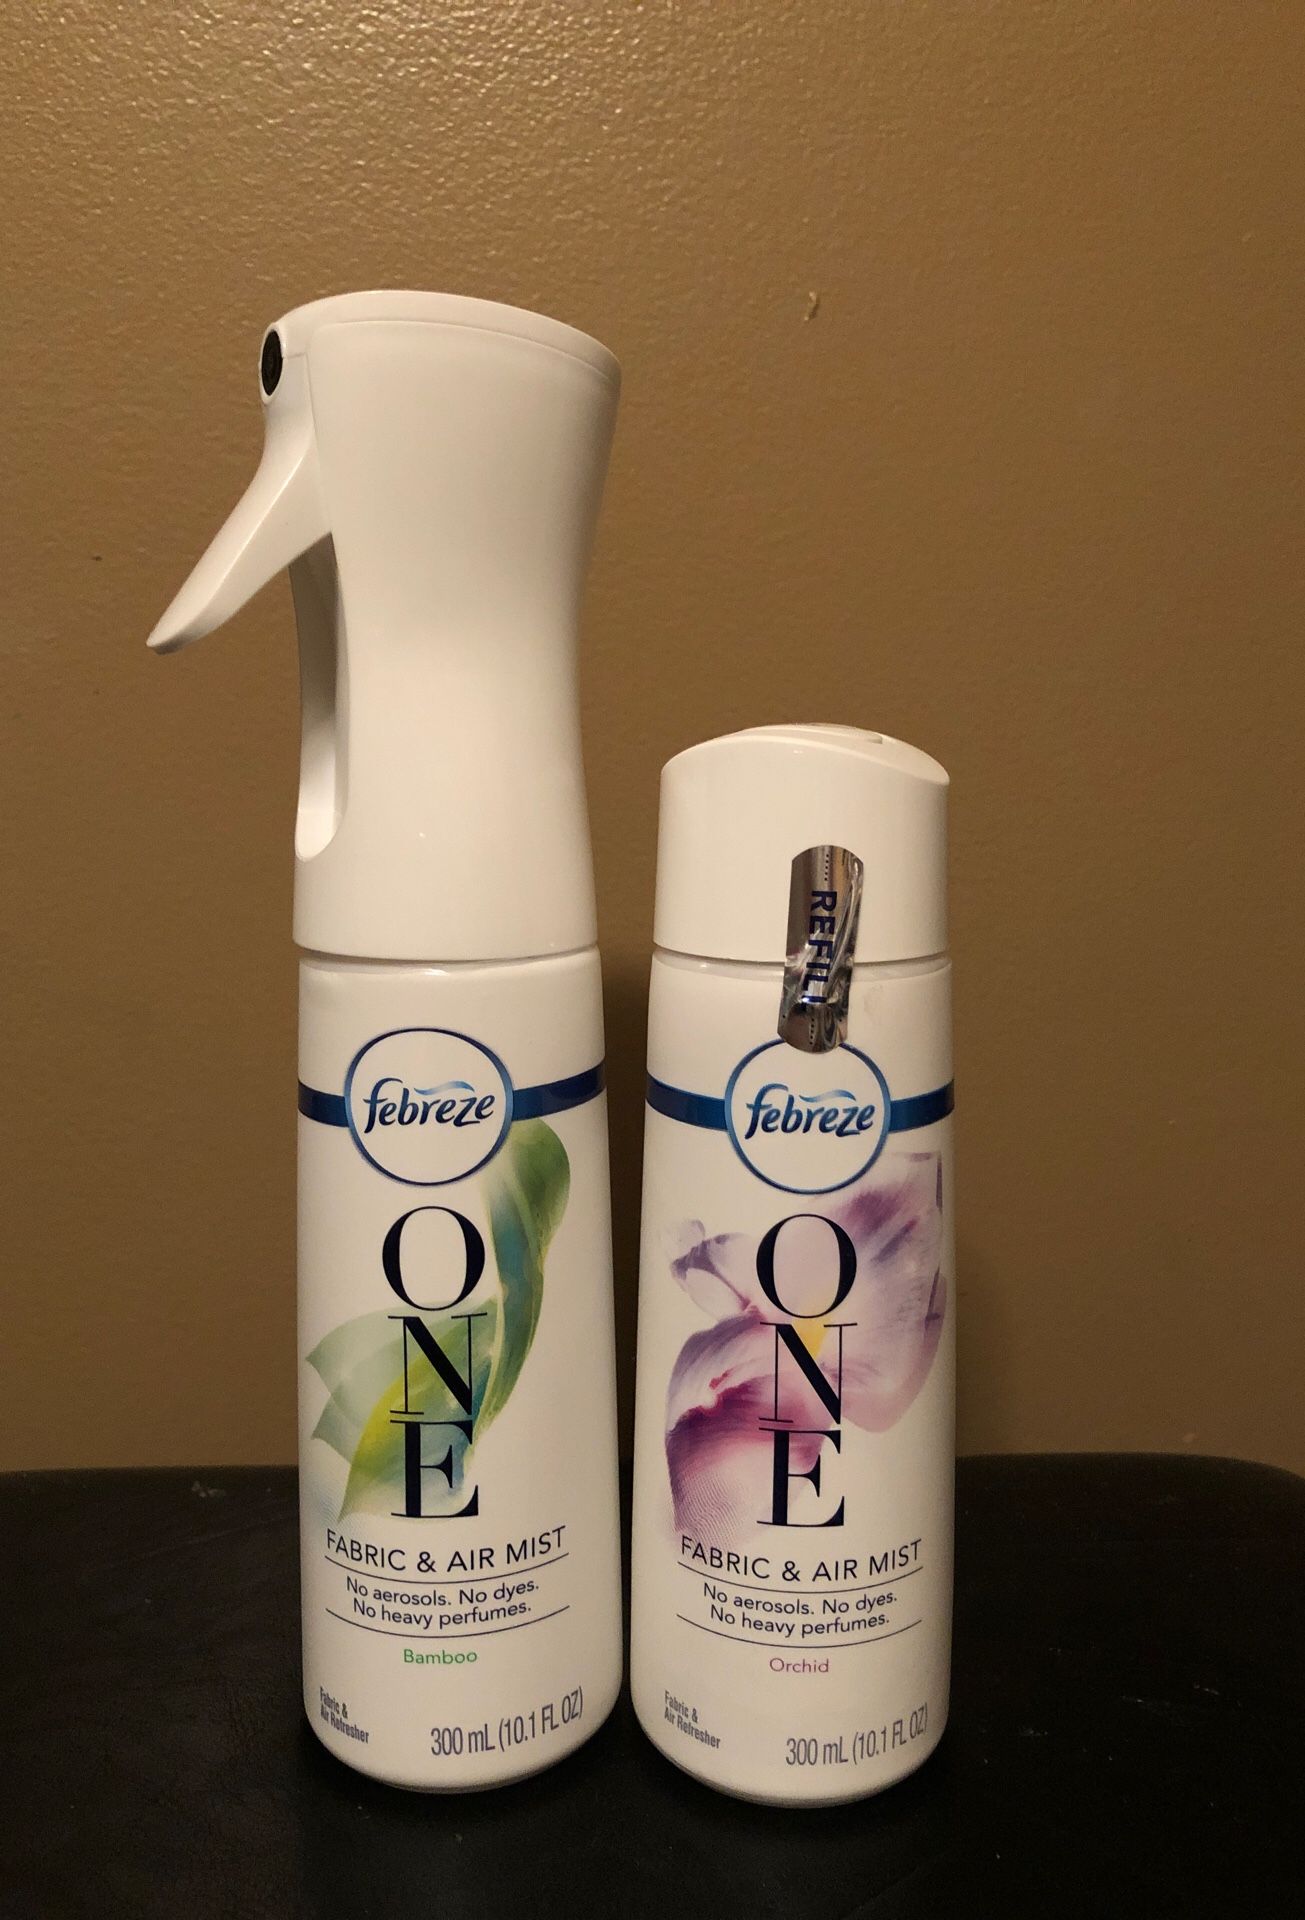 Febreze ONE fabric and air mist and refill